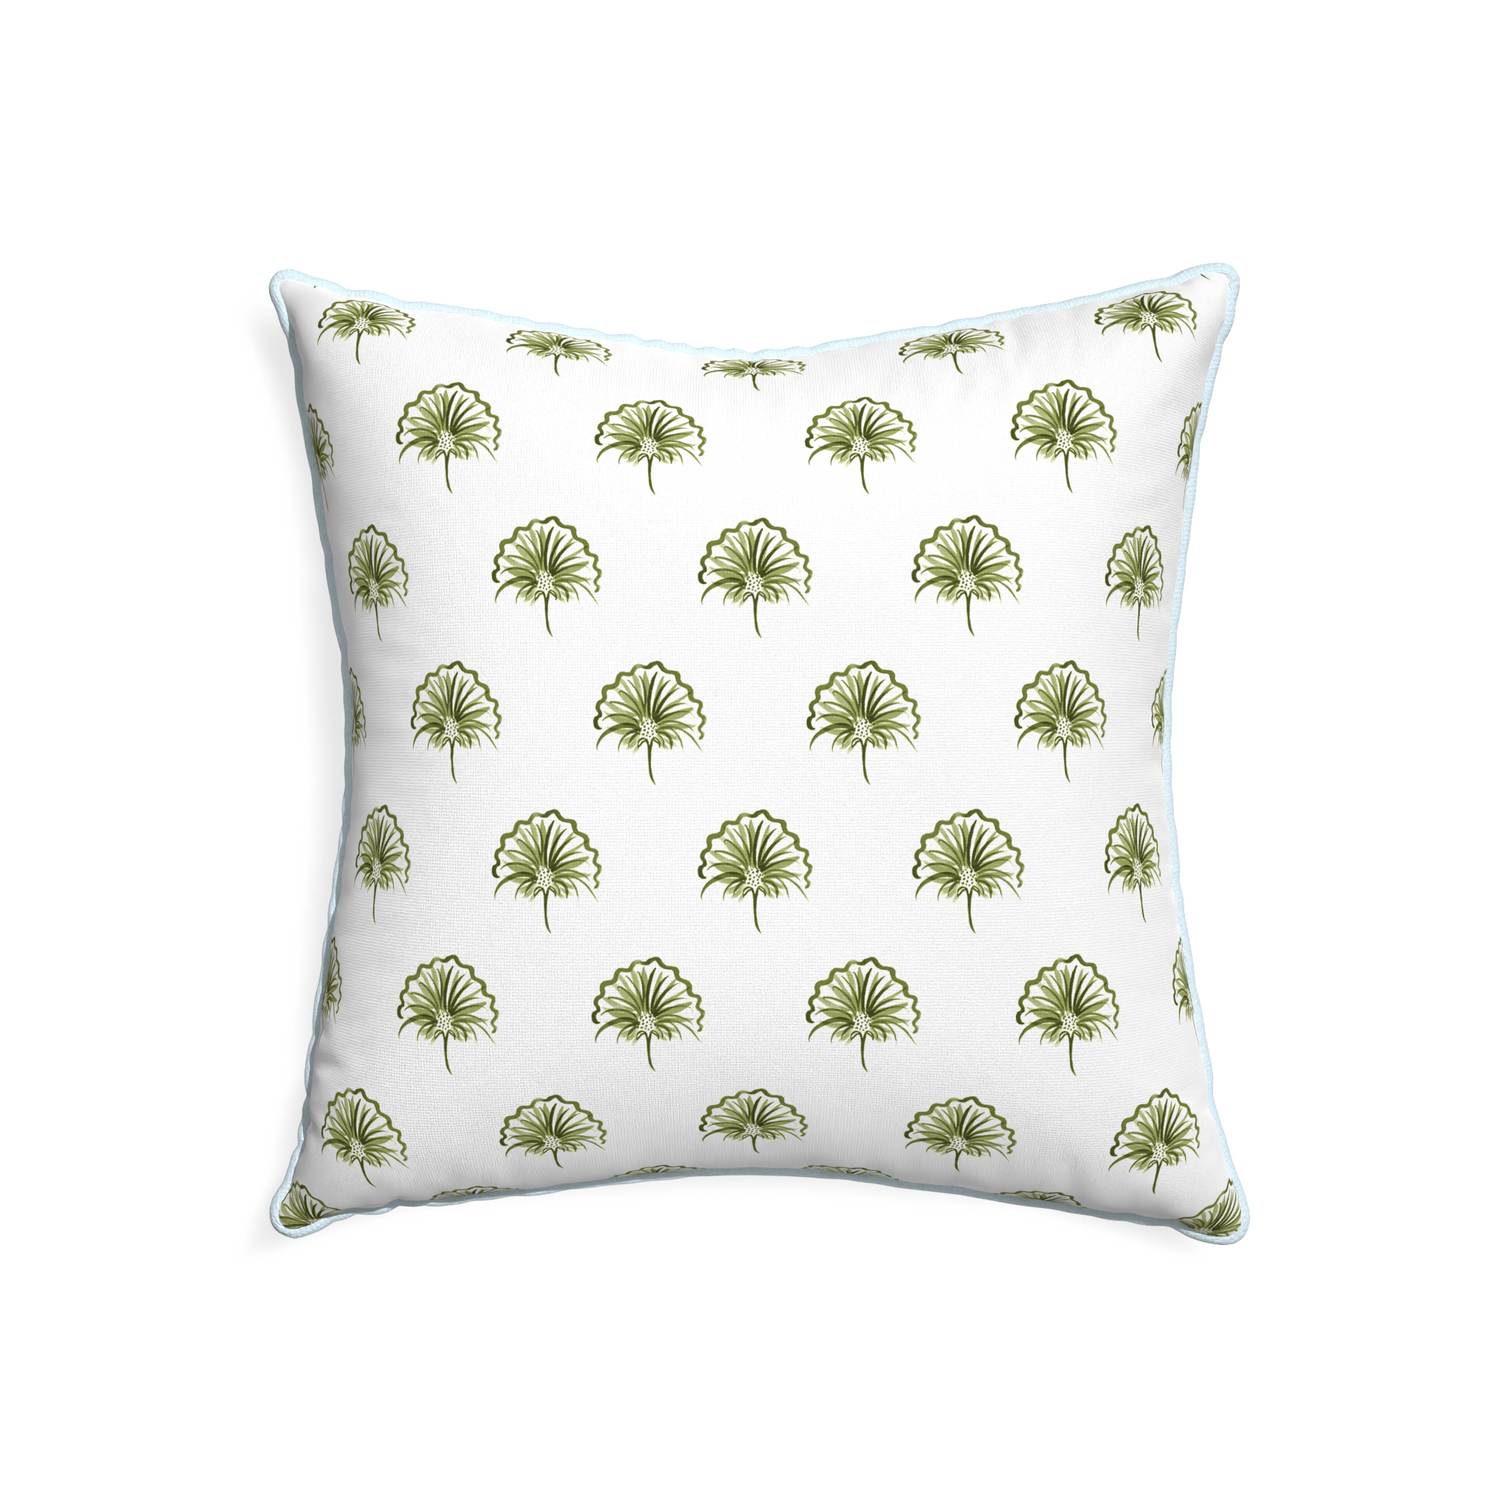 22-square penelope moss custom green floralpillow with powder piping on white background